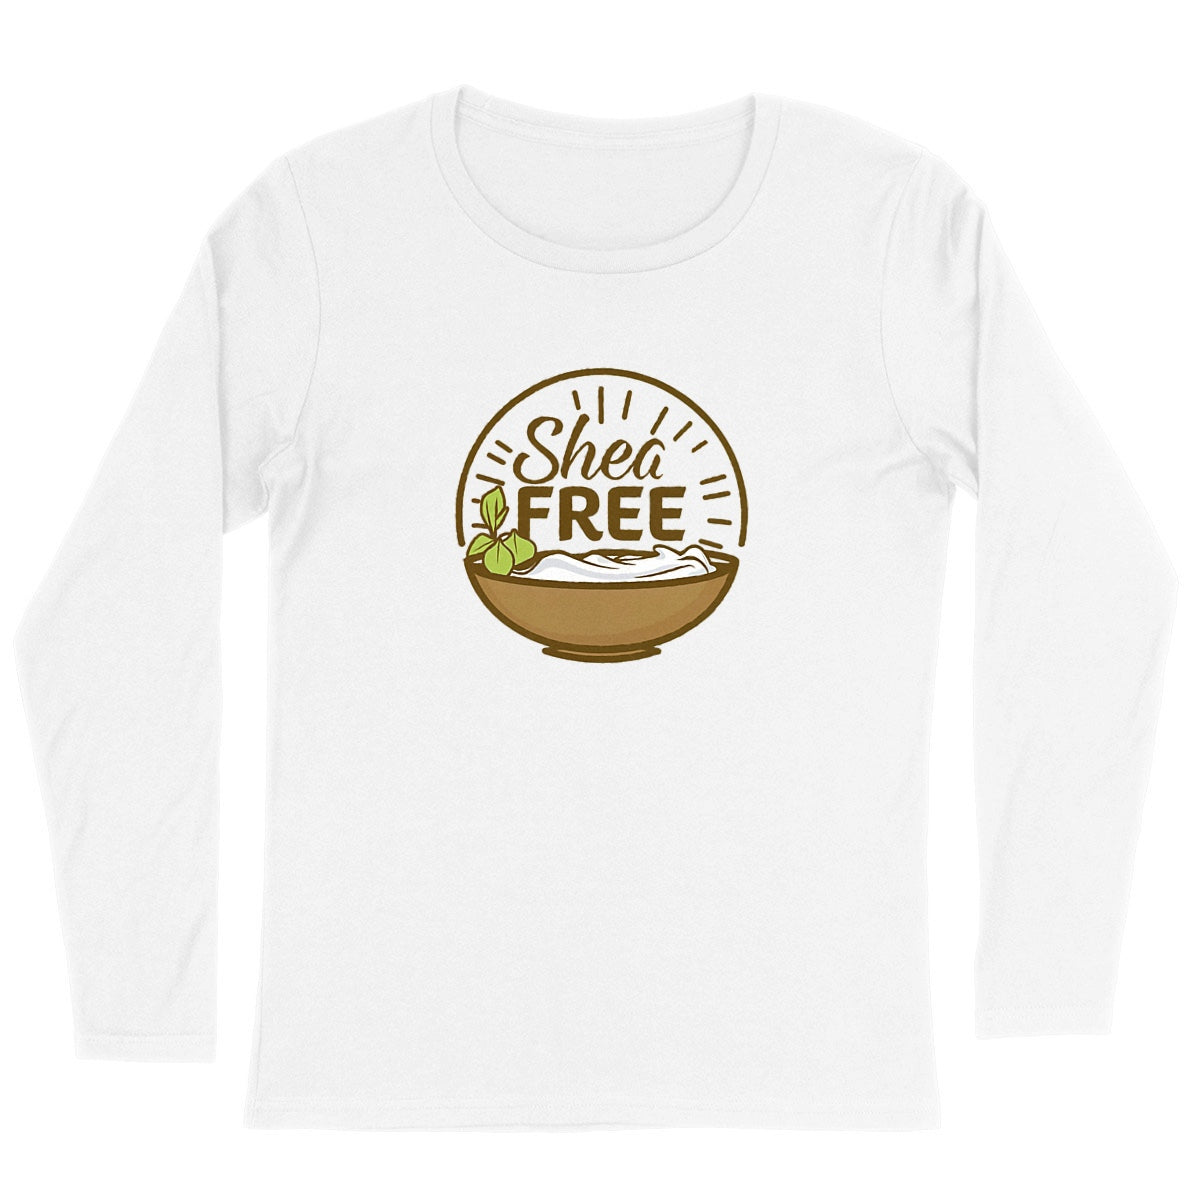 Shea Butter Free Long Sleeve Organic Cotton Graphic Shirt | Hypoallergenic - Allergy Friendly - Naturally Free